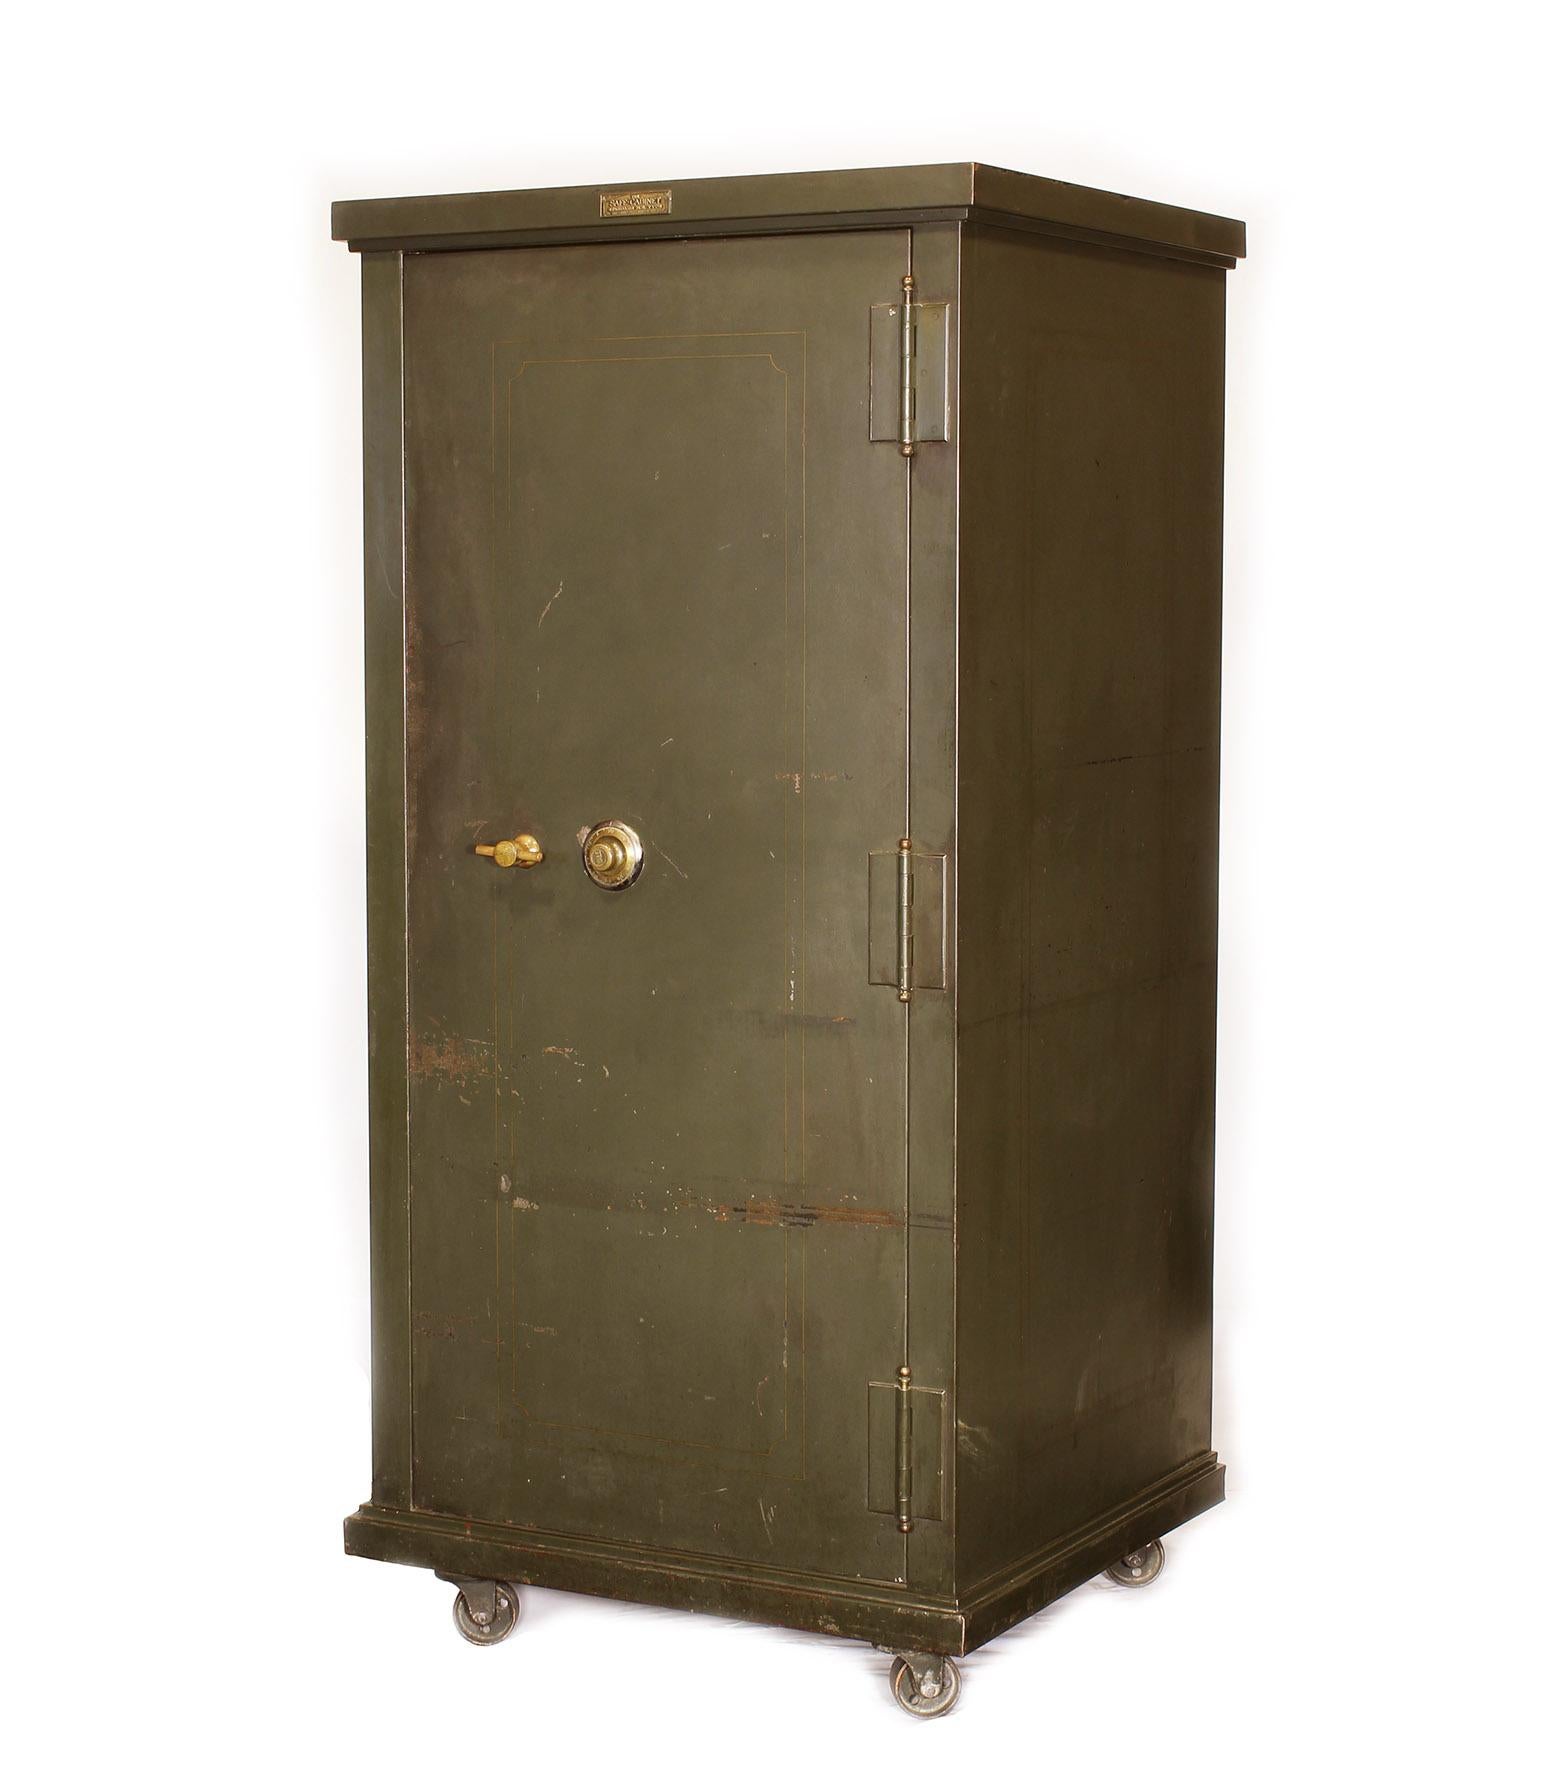 Vintage steel bank / gun safe made by The Safe-Cabinet Co. Features two drawers, adjustable shelves, one storage compartment, four swivel castors and brass hardware. Three labels on safe. 